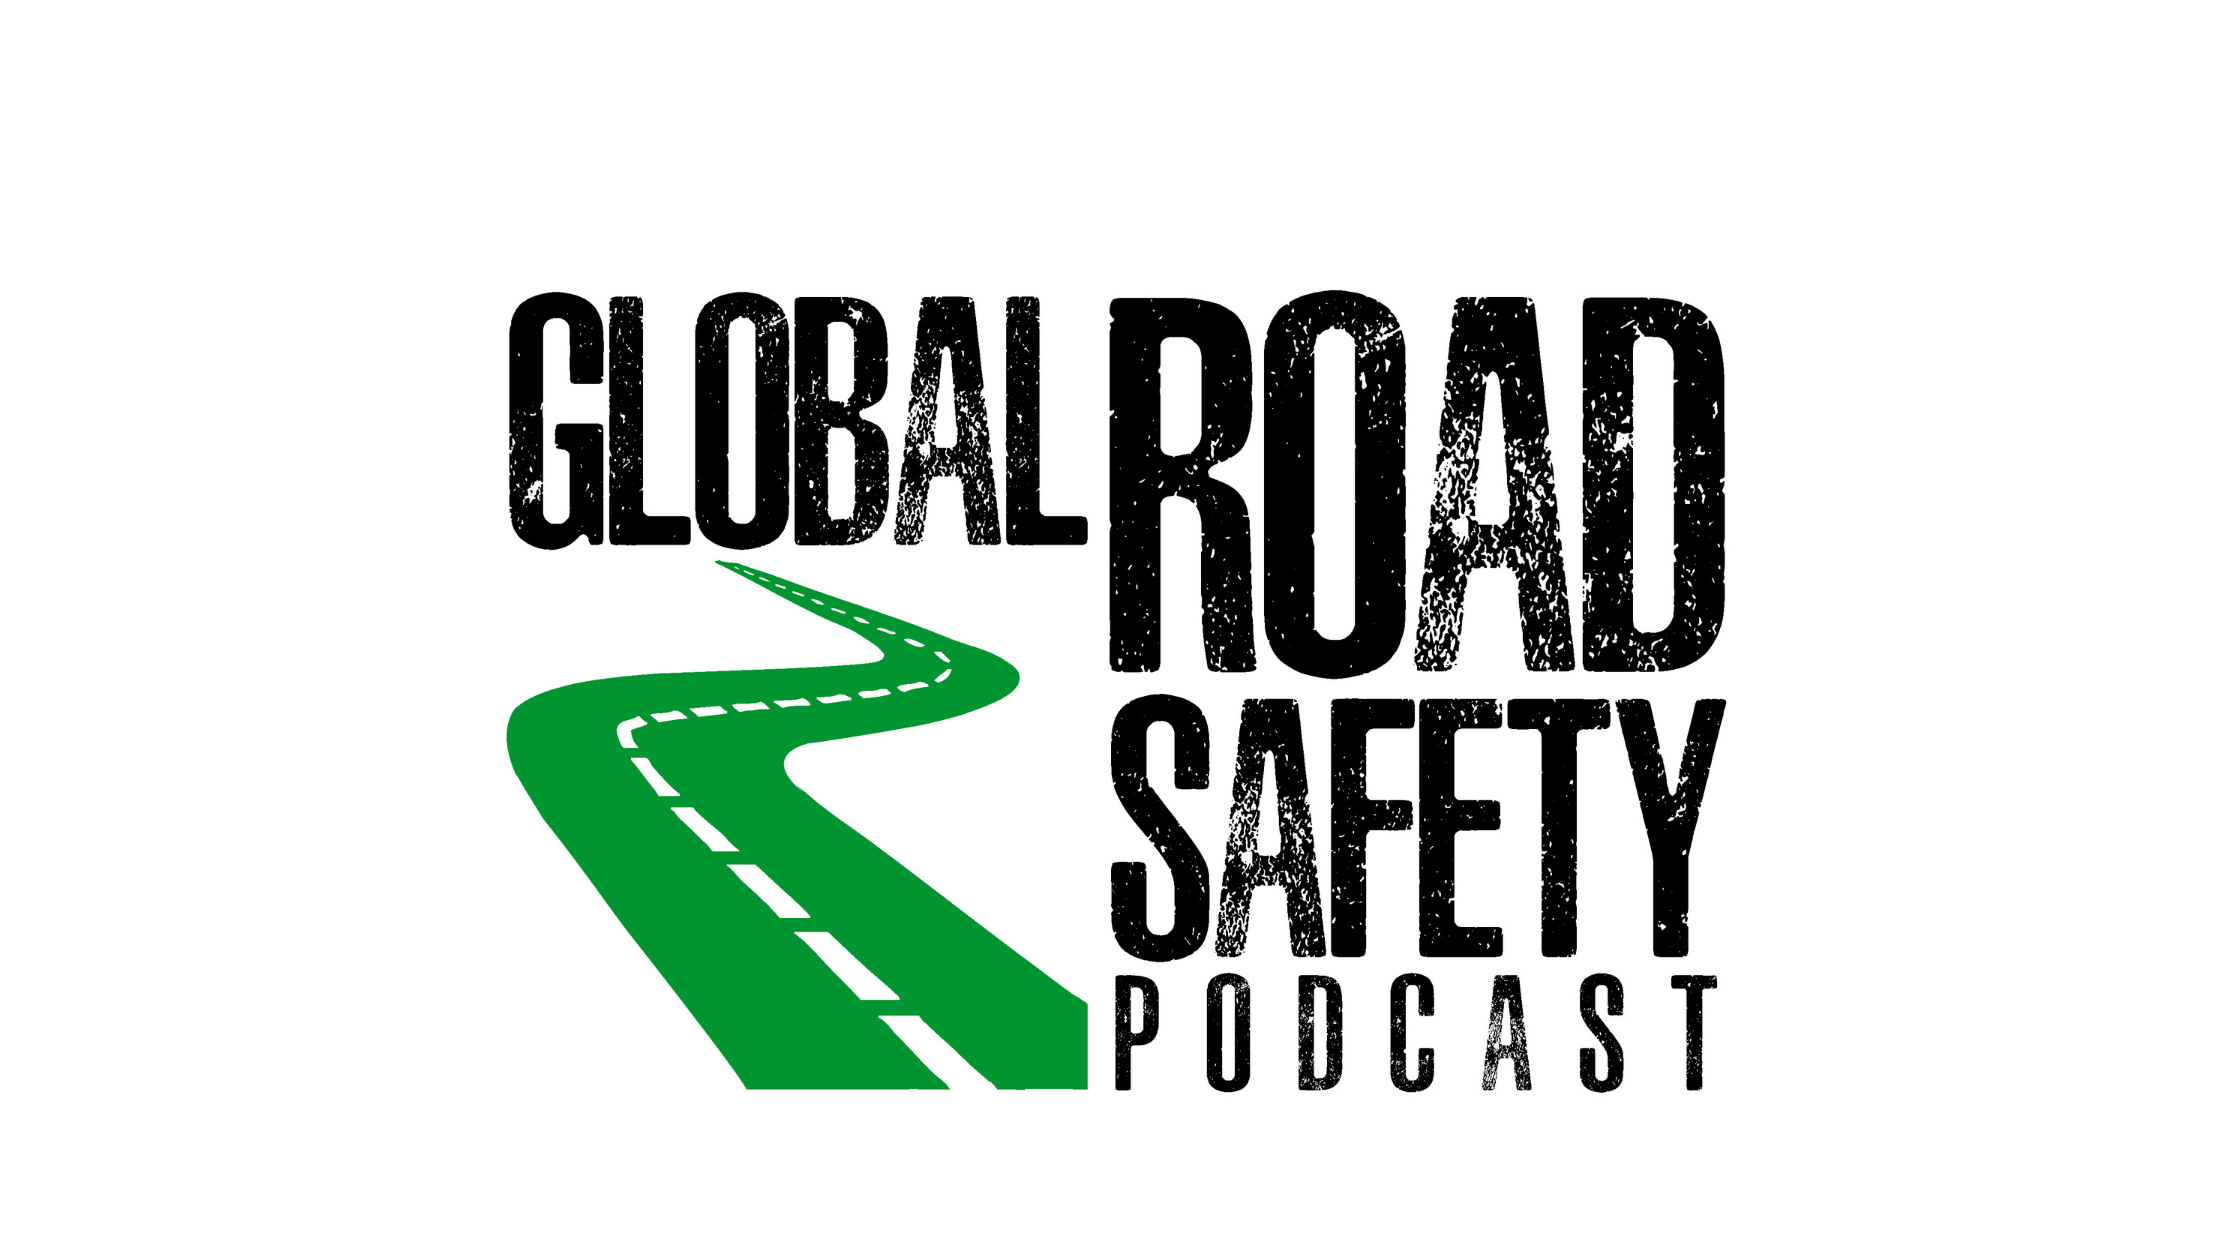 Road Safety Progress in Emerging Markets – Pakistan With Dr. Muhammad Navid Tahir